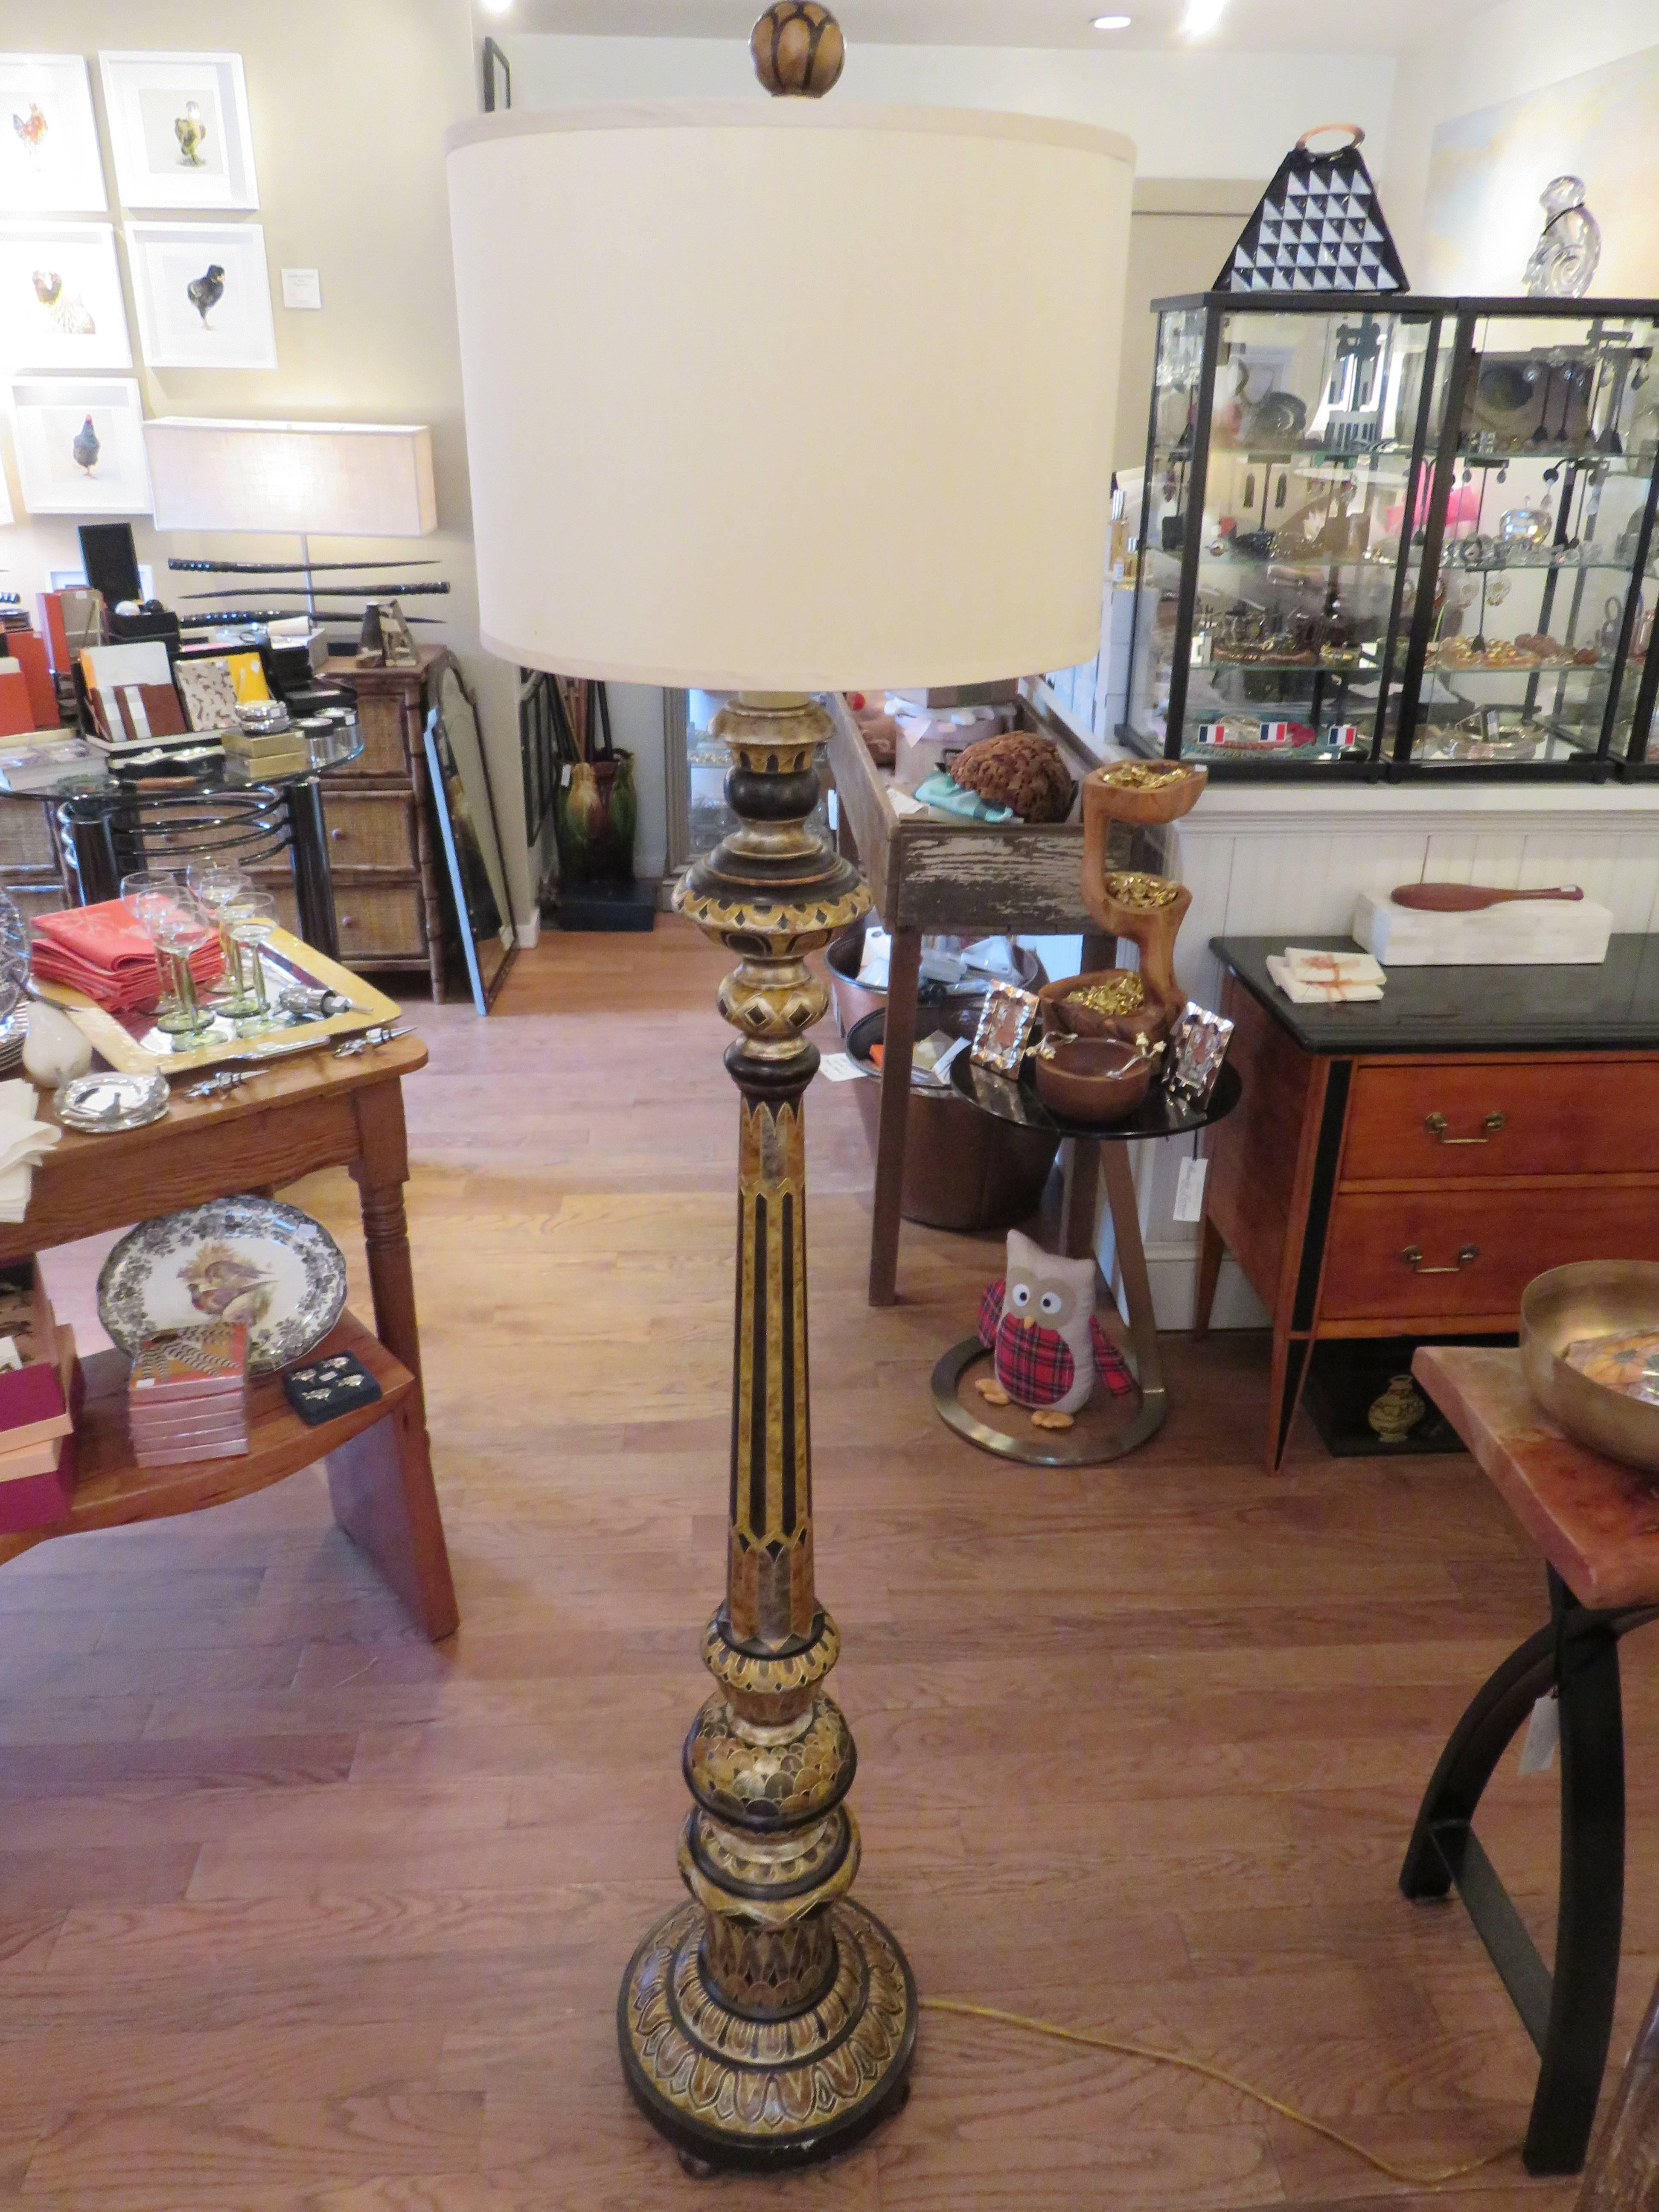 Hand-crafted ebony wood, and hand decorated classical English floor lamp. Golds, coppers, bronze and ebony tones, make this lamp a work of art.
New three way switch up to 150 watts,beige silk shade,stunning for any setting.
Measuring 60 inches to